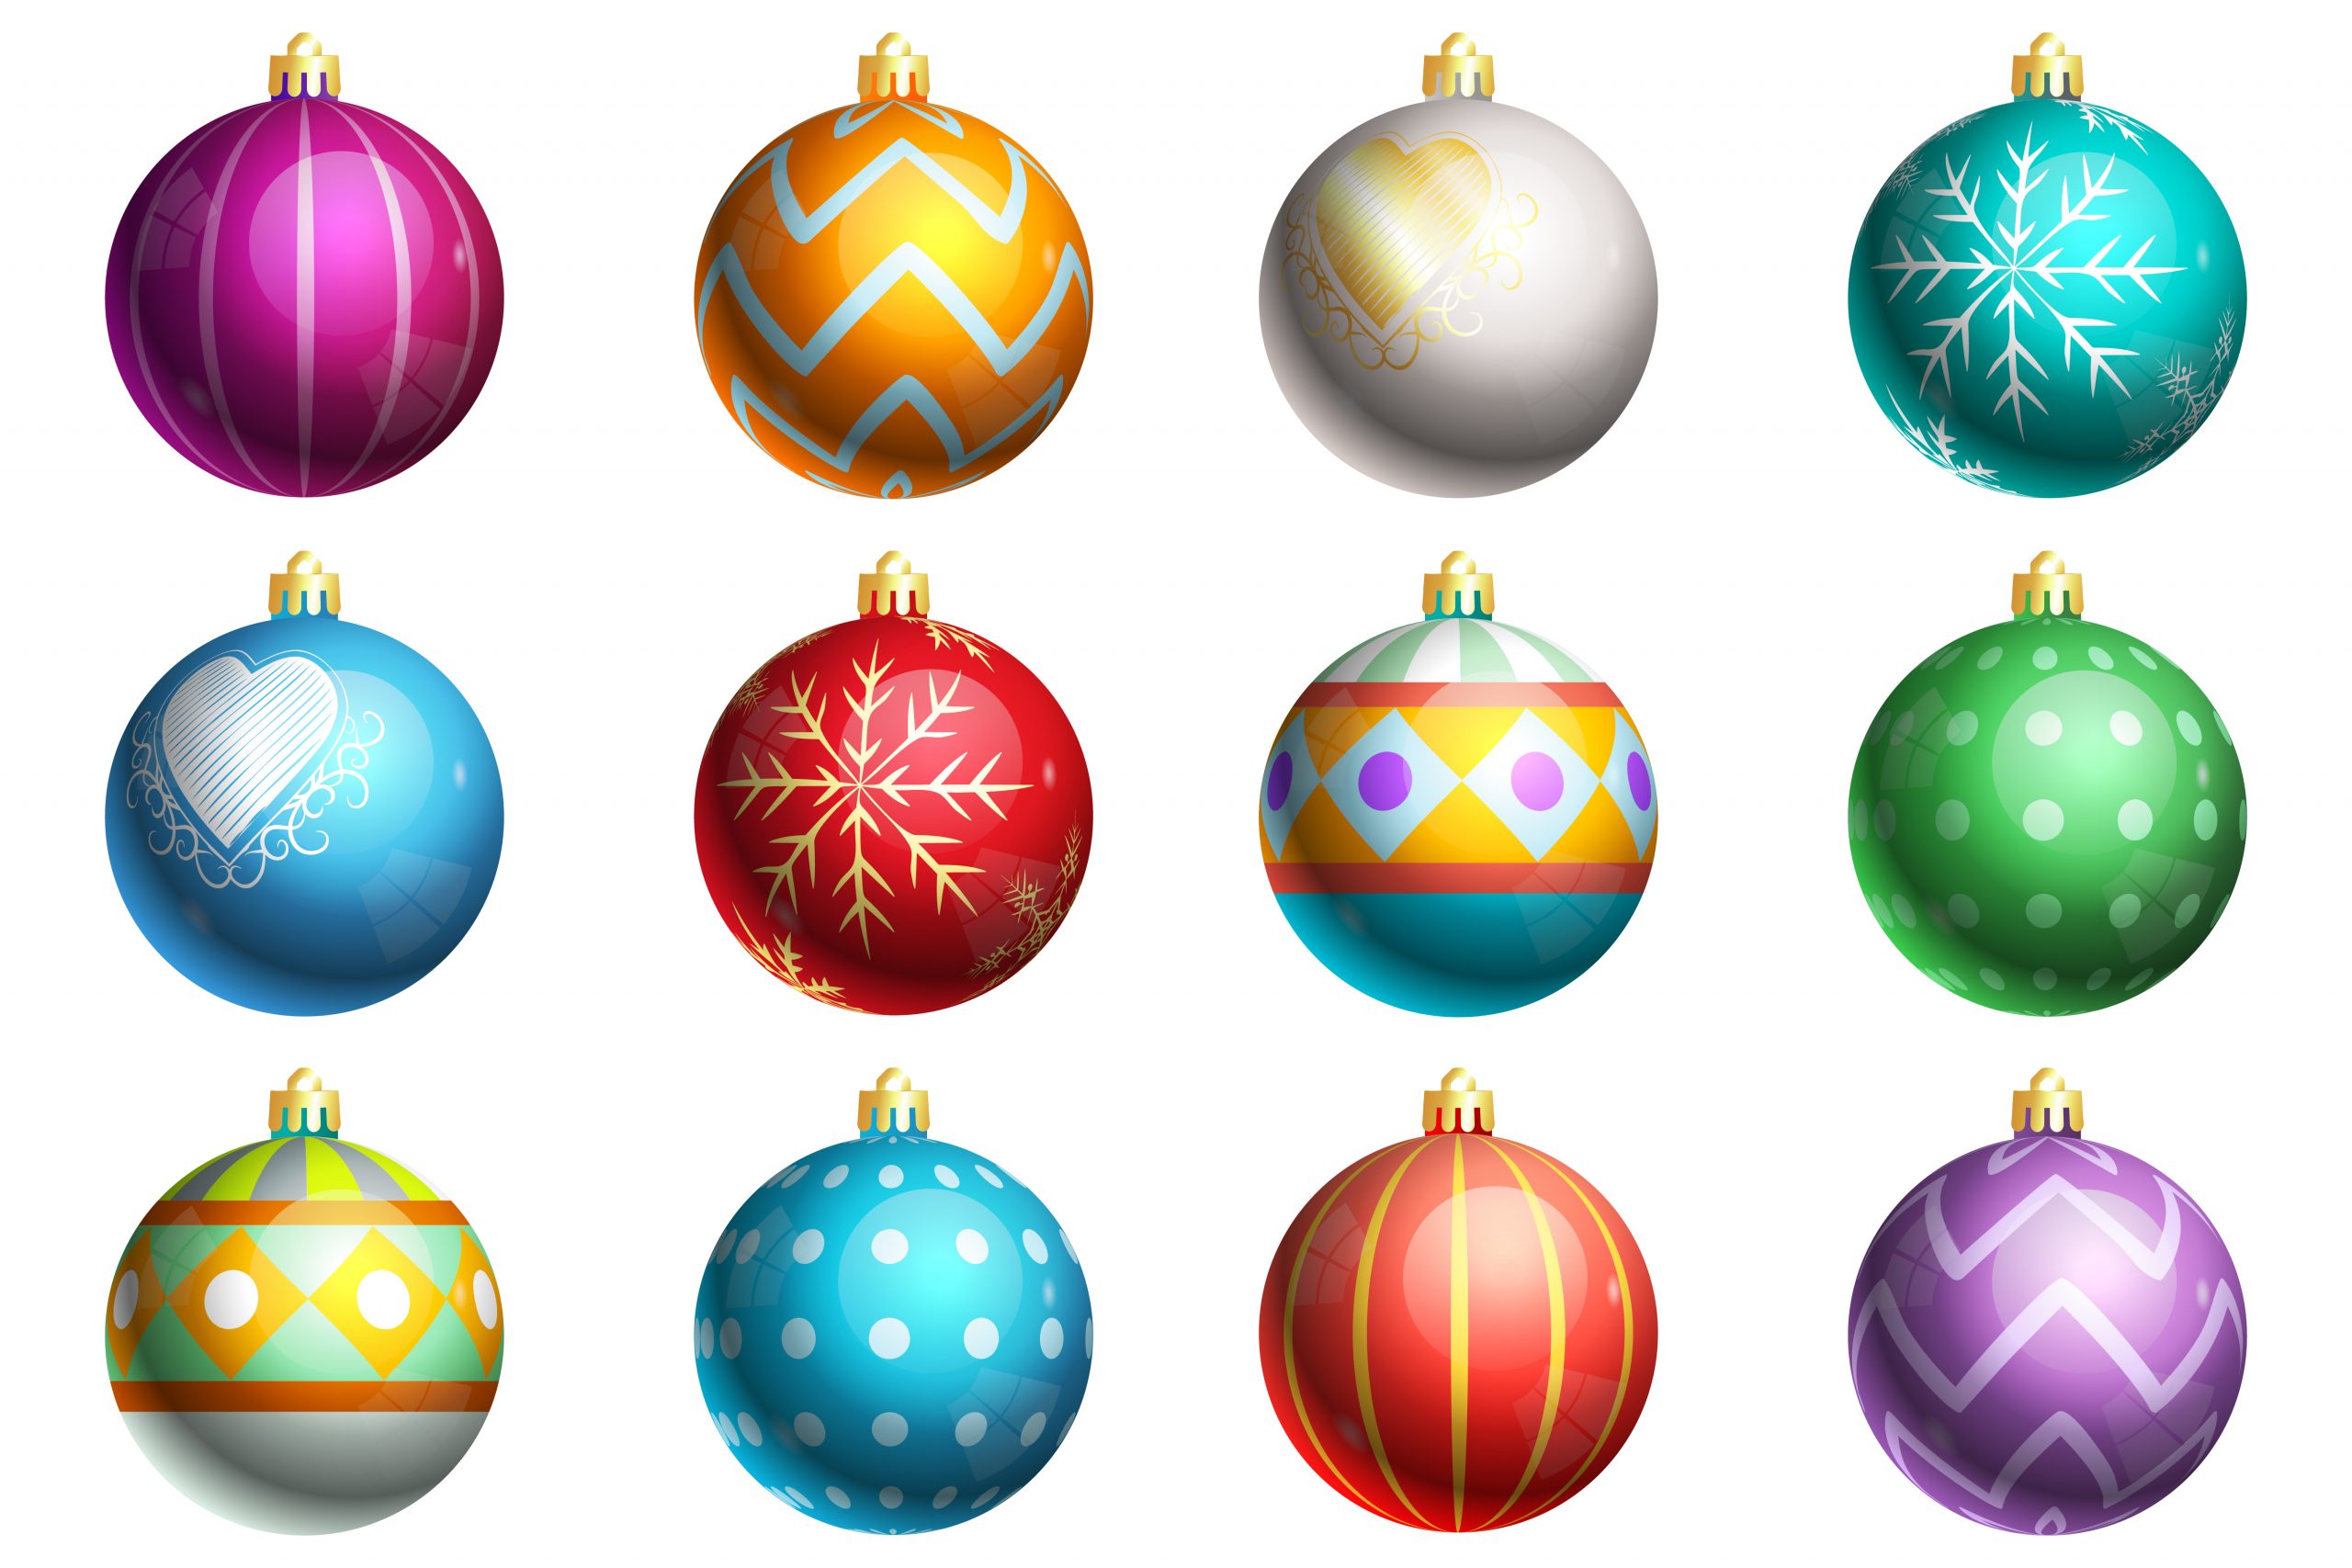 How to paint a Christmas glass ornament